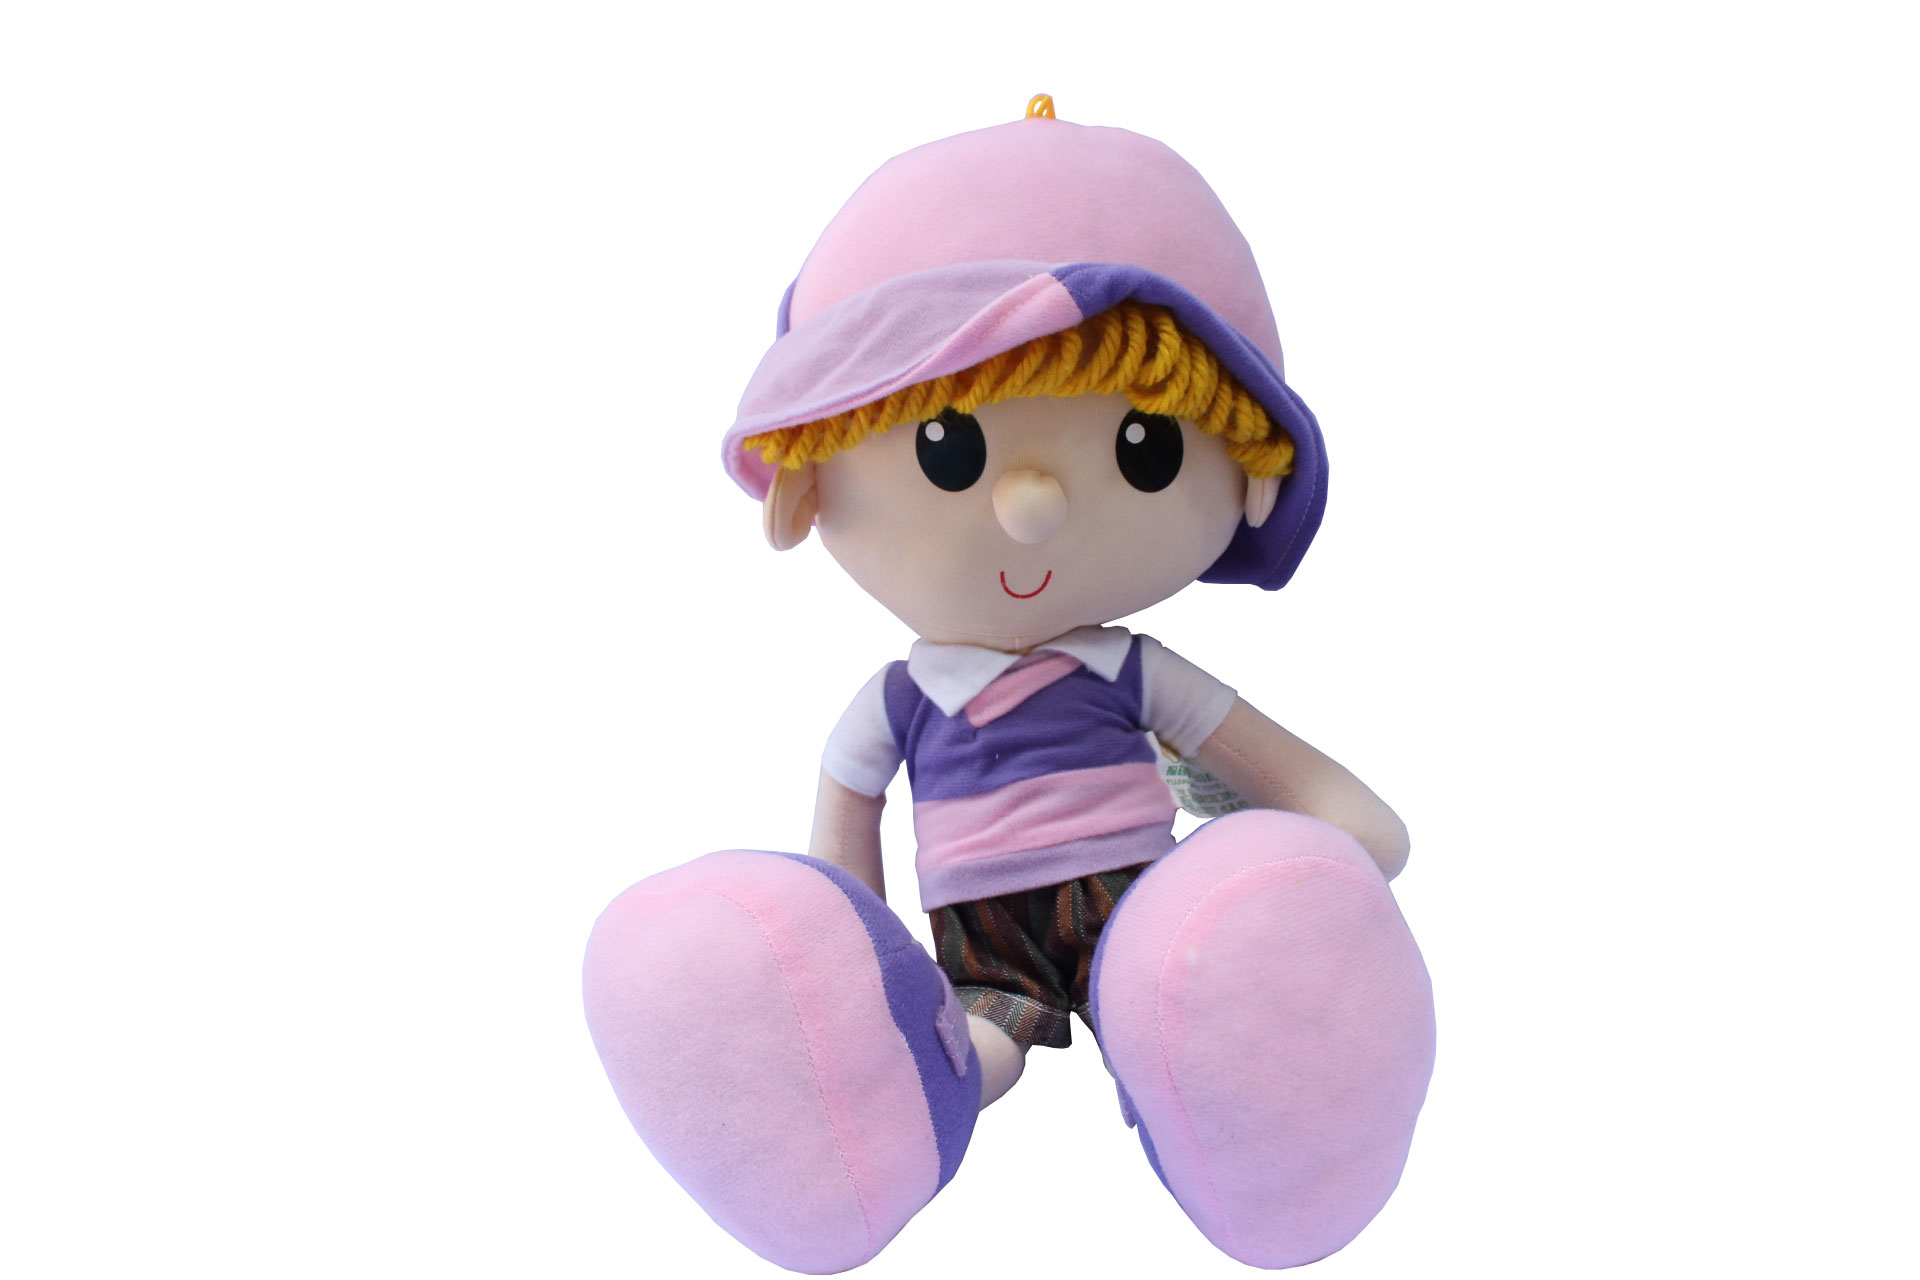 The new creative yuppie cloth doll plush toy doll children's Day gifts for the kids in the kindergarten year gifts gift company11